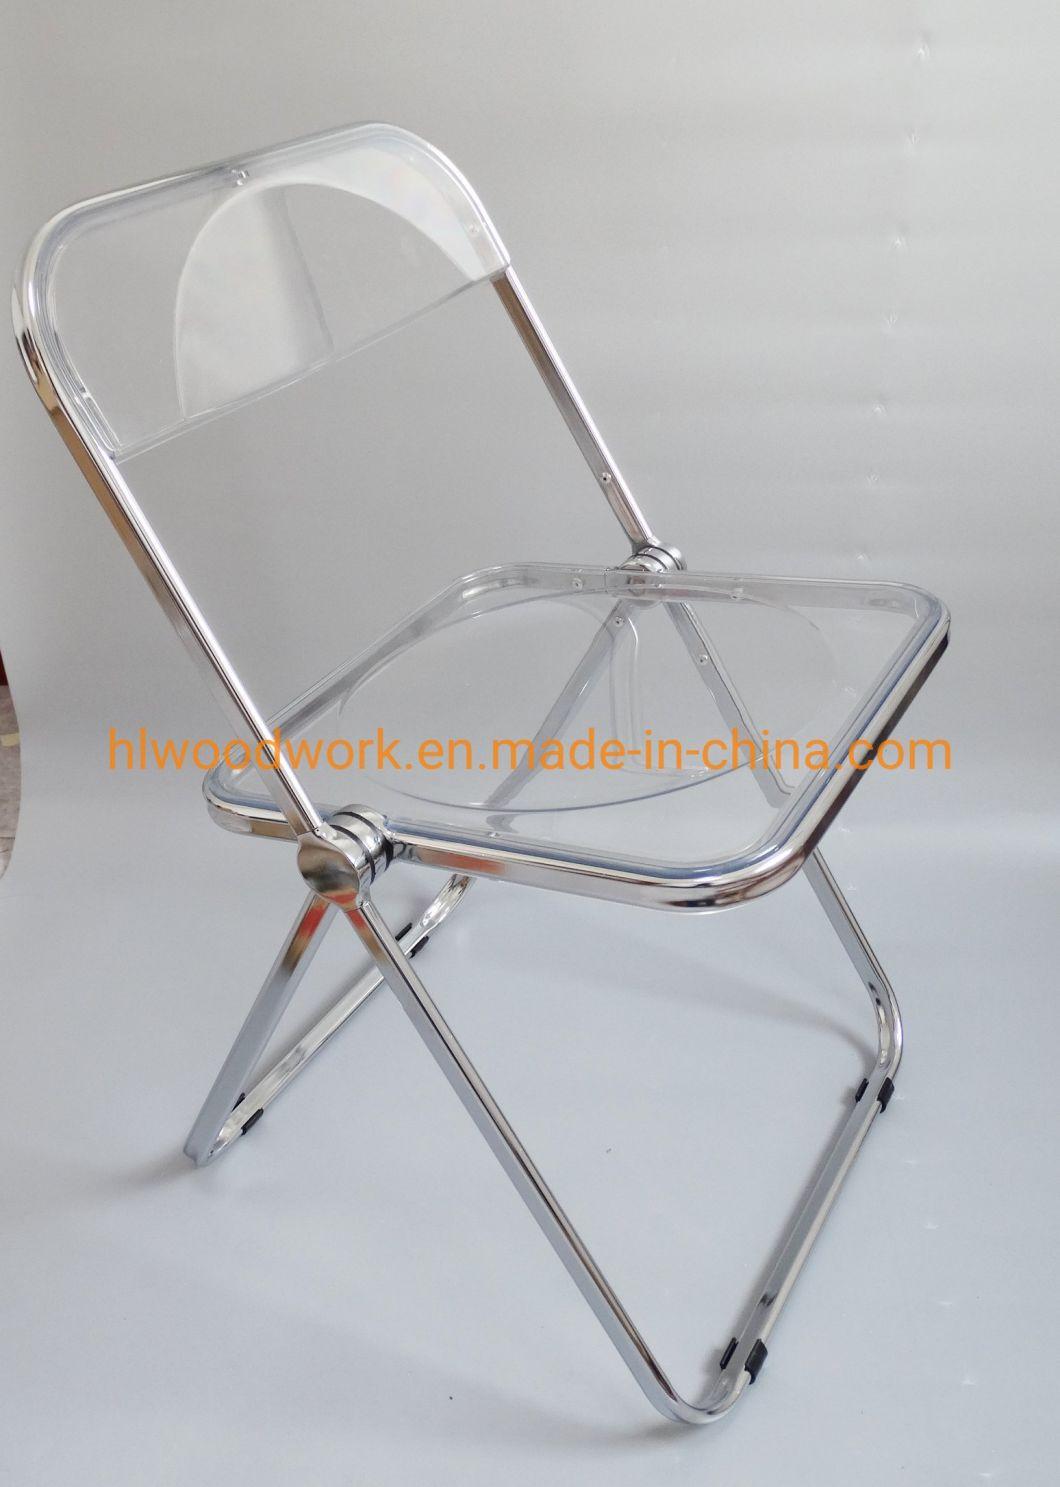 Modern Transparent Orange Folding Chair PC Plastic Dining Room Chair Chrome Frame Office Bar Dining Leisure Banquet Wedding Meeting Chair Plastic Dining Chair